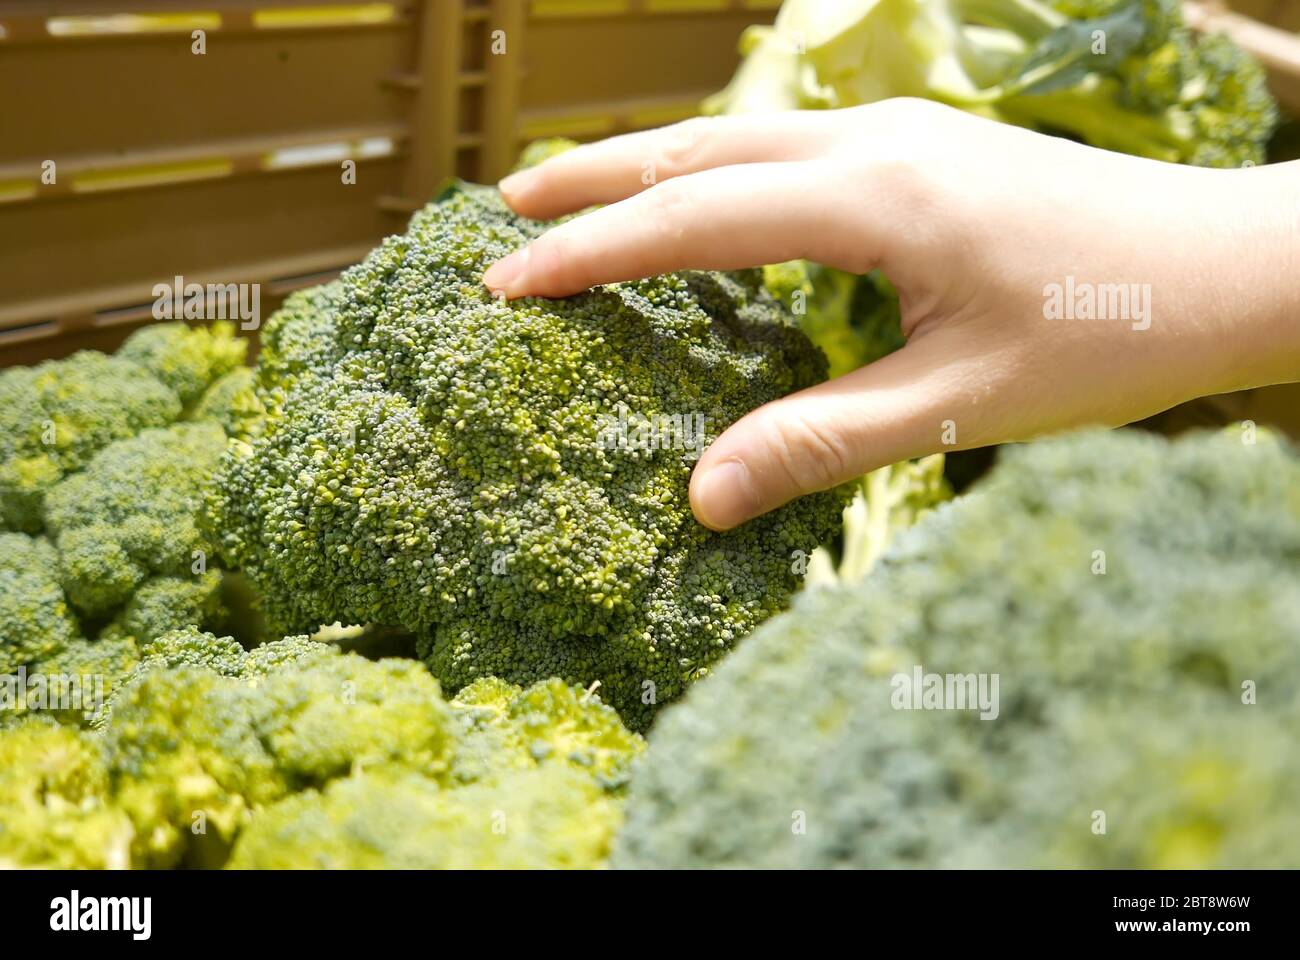 Motion of woman's hand picking broccoli inside superstore Stock Photo